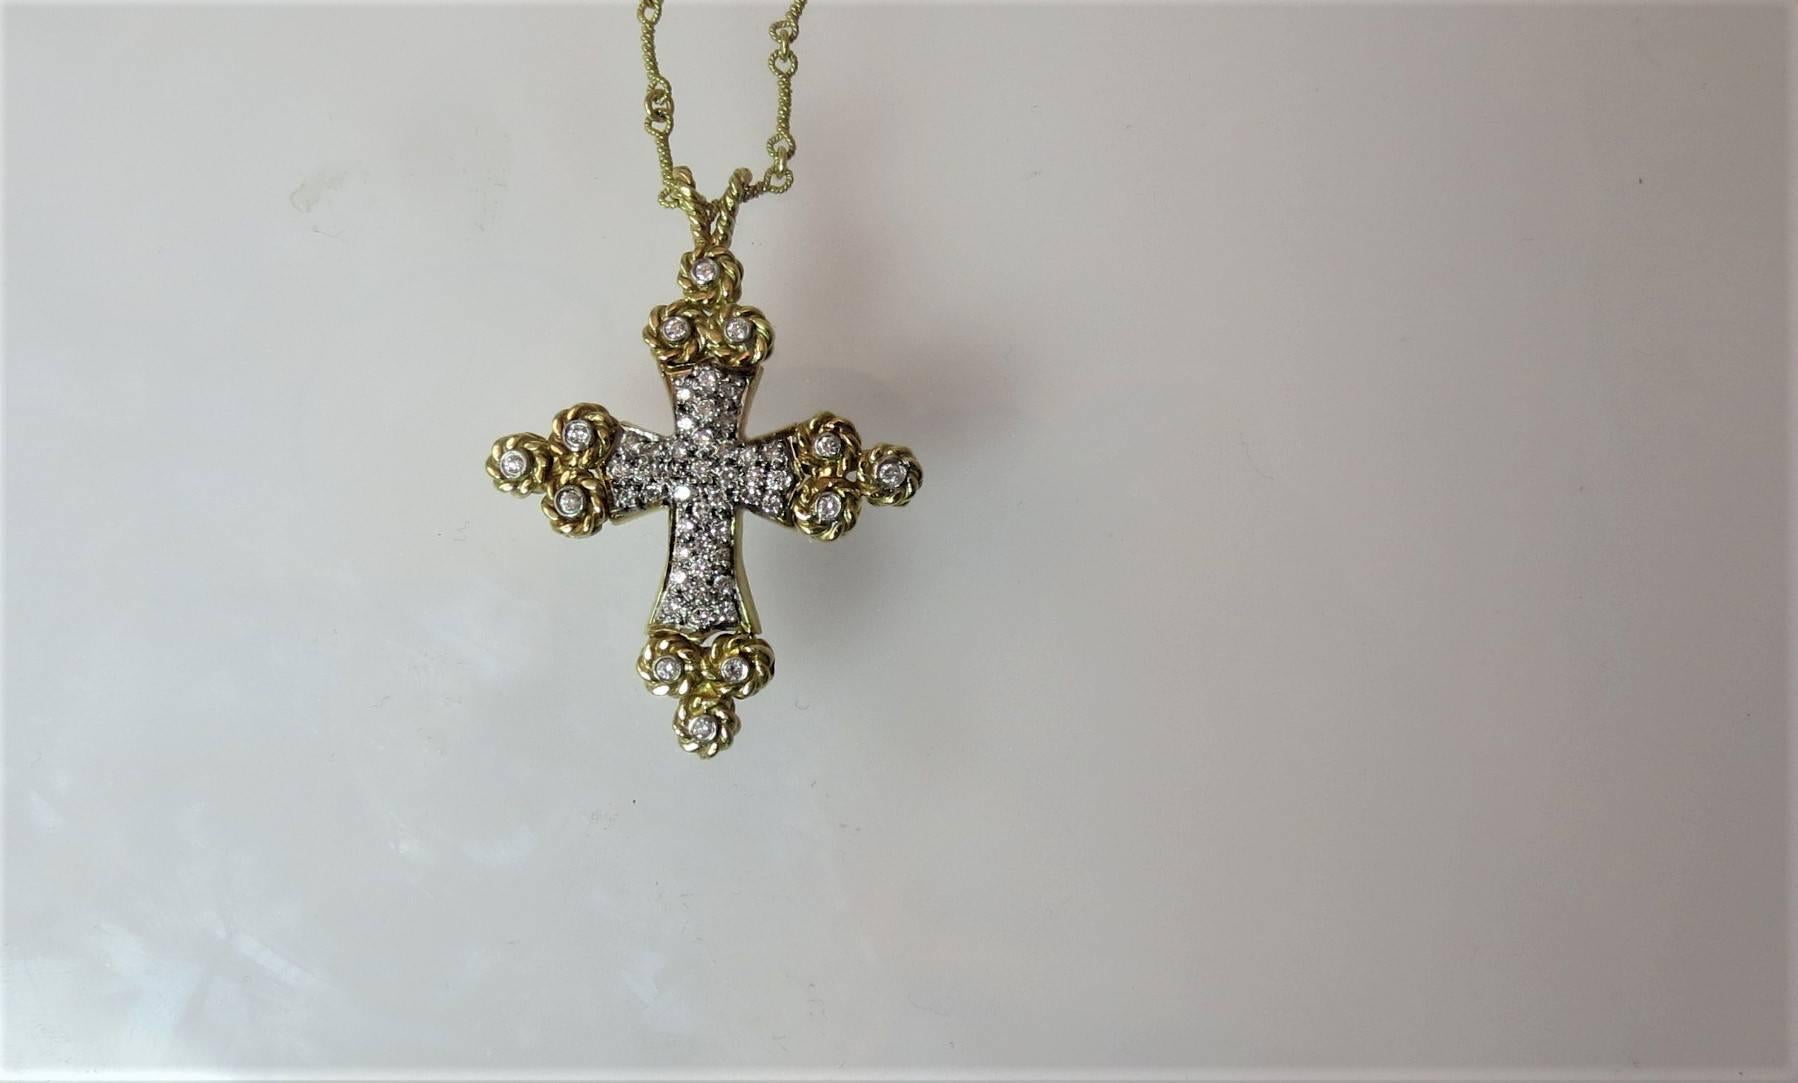 Cassis 18K yellow gold and diamond cross pendant set with 51 full cut round diamonds weighing .77cts suspended from 18 inch yellow gold chain.